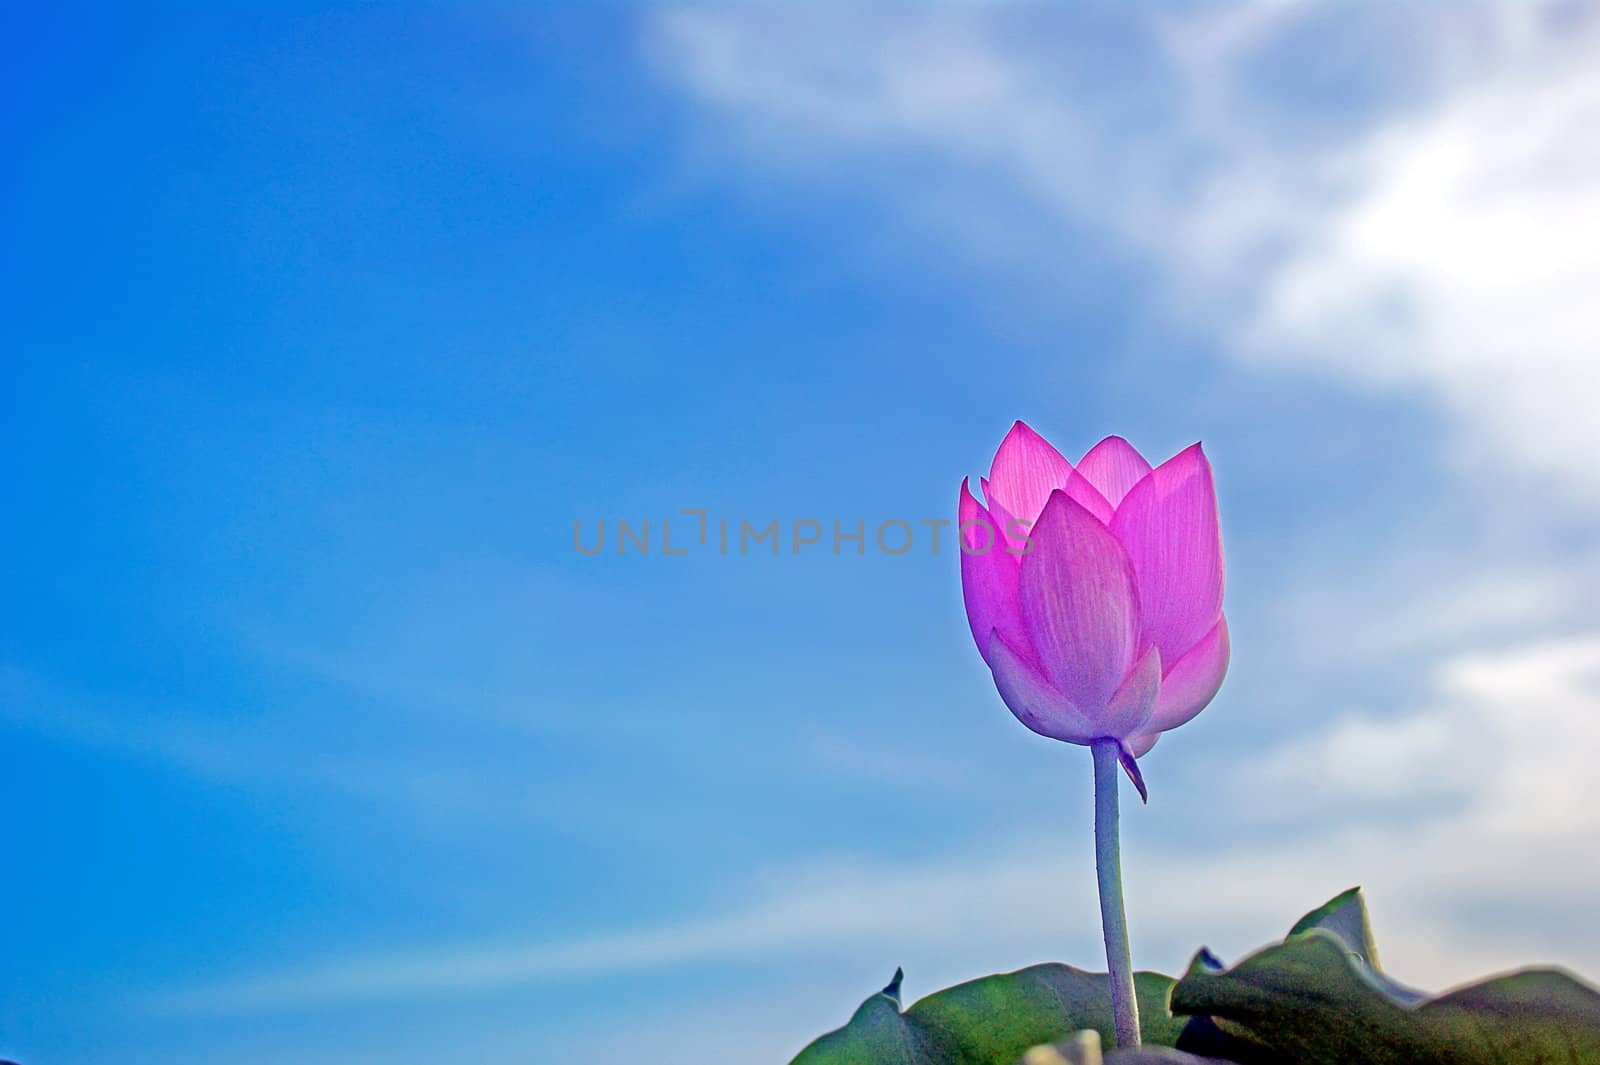 Lotus flower isolated on a blue background Photo taken on: June, 2008